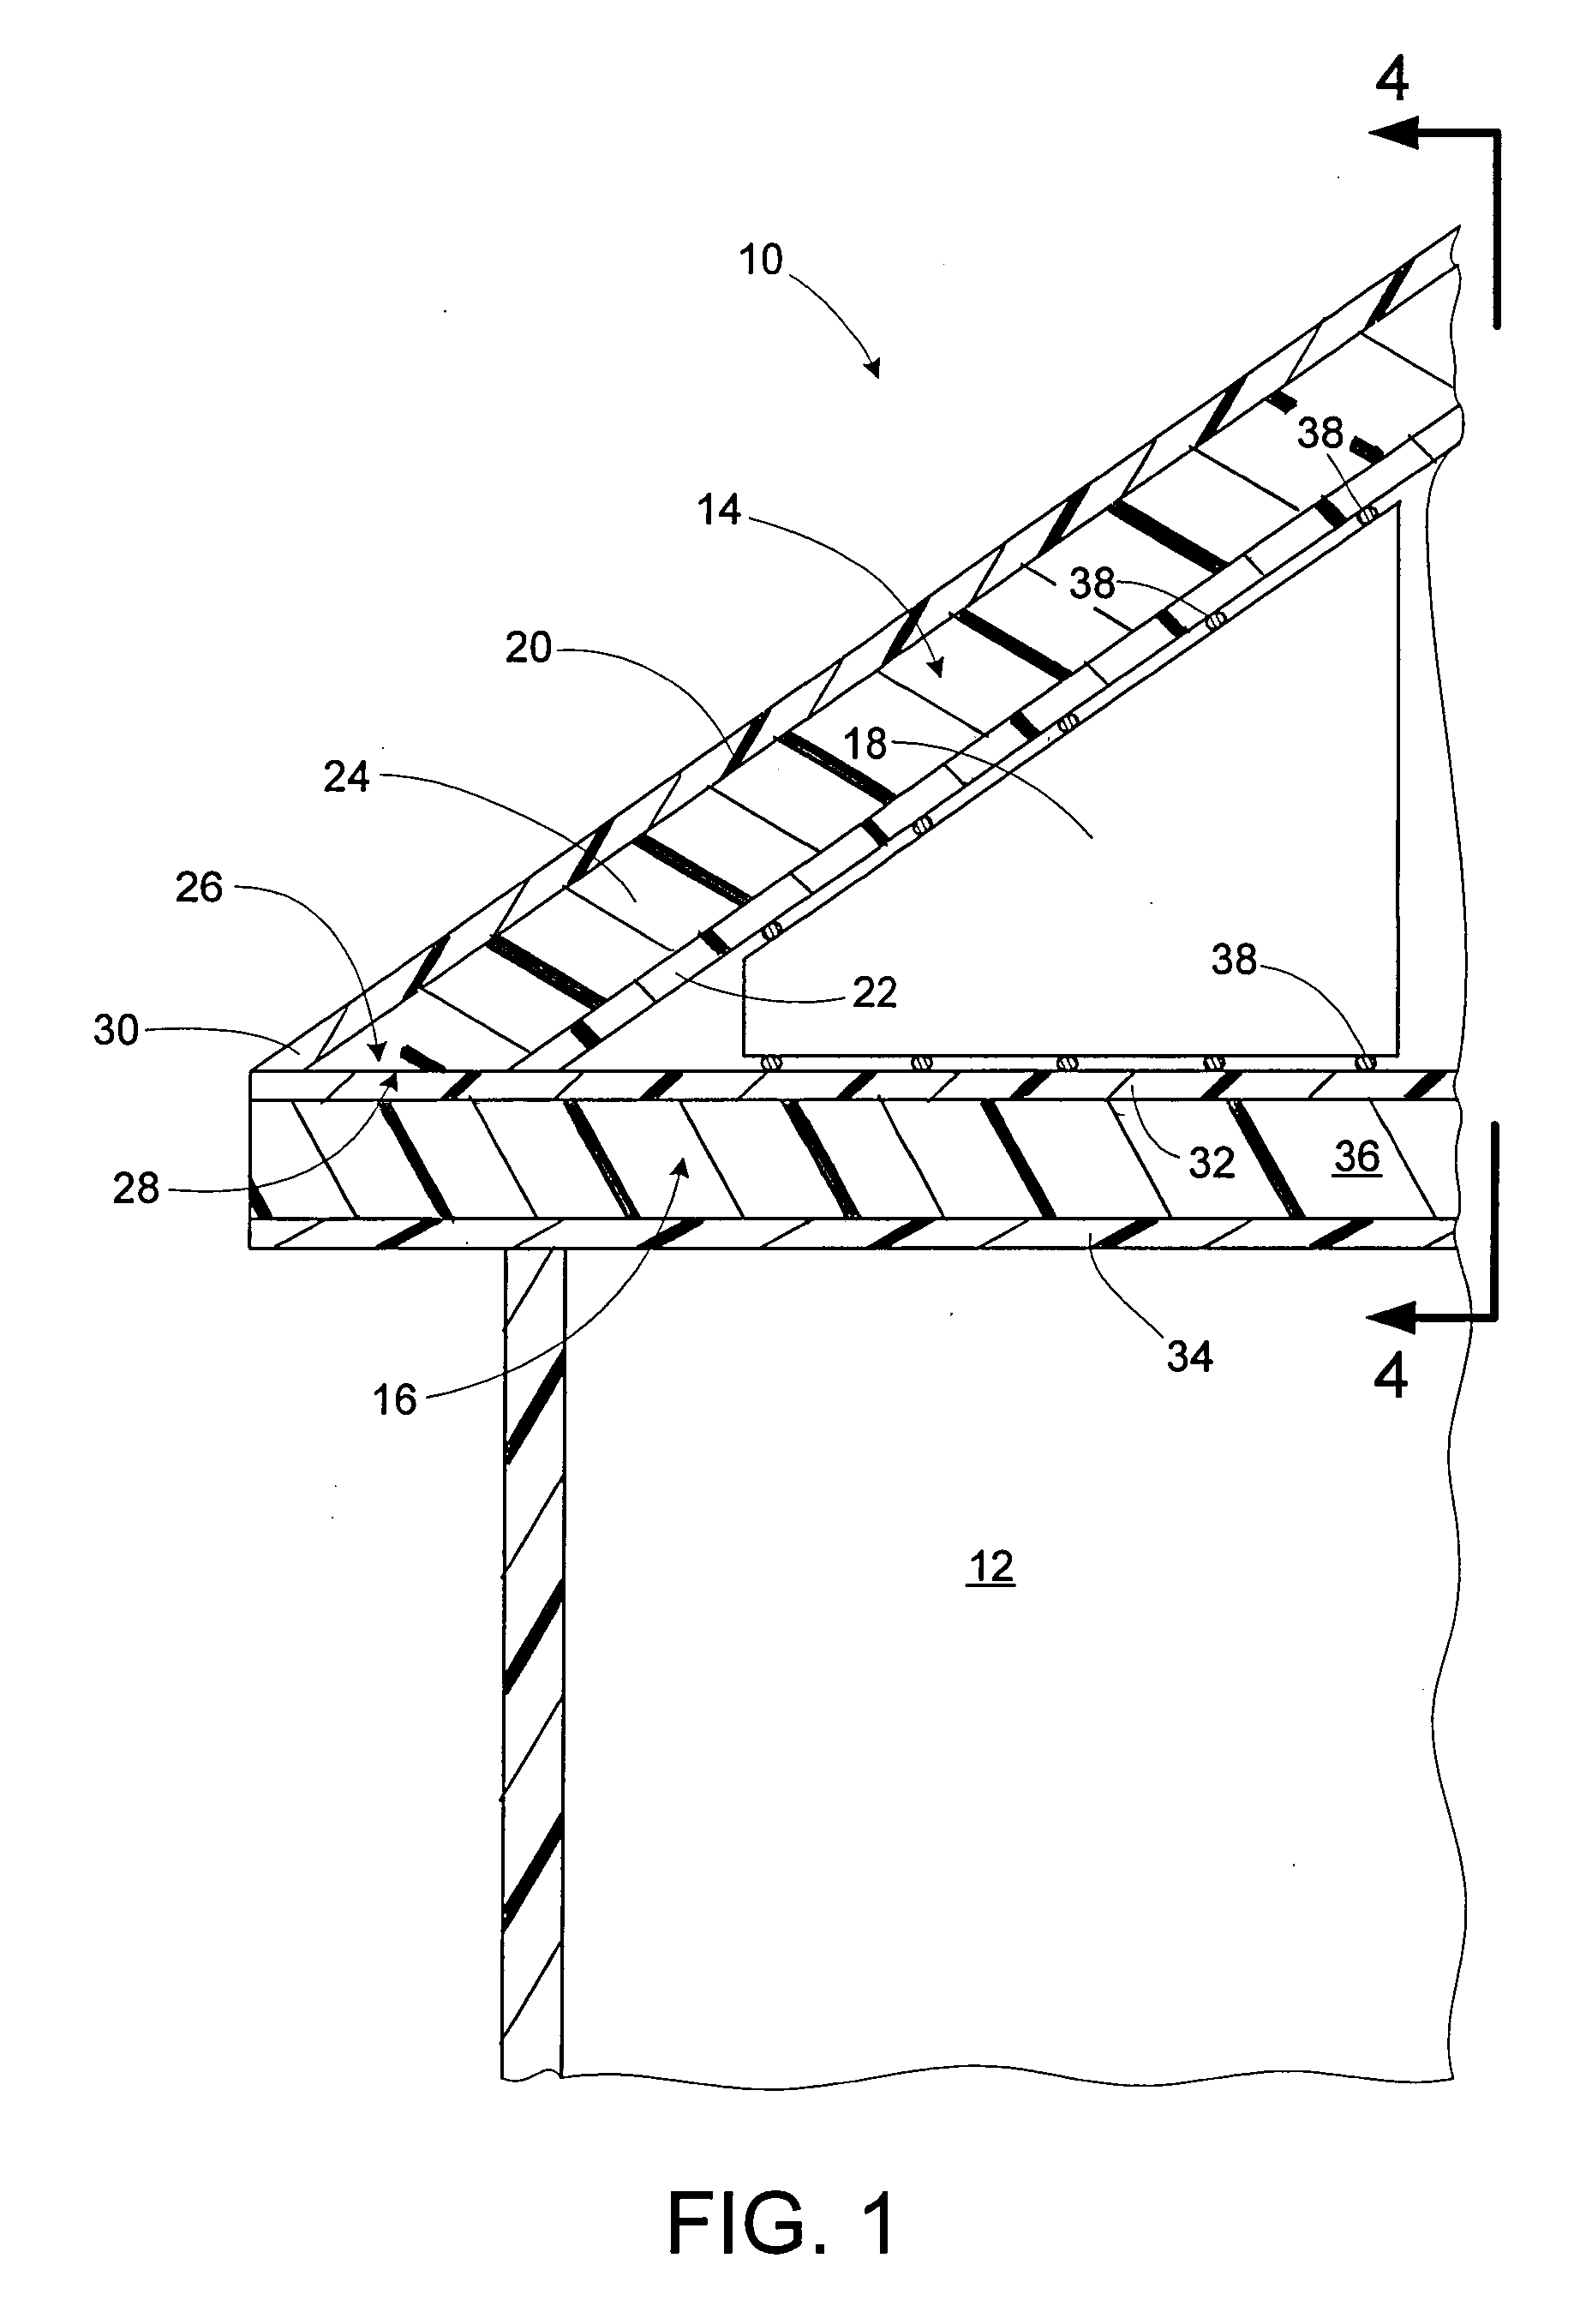 System and method of forming at least a portion of a reinforced roof structure from sandwich panels